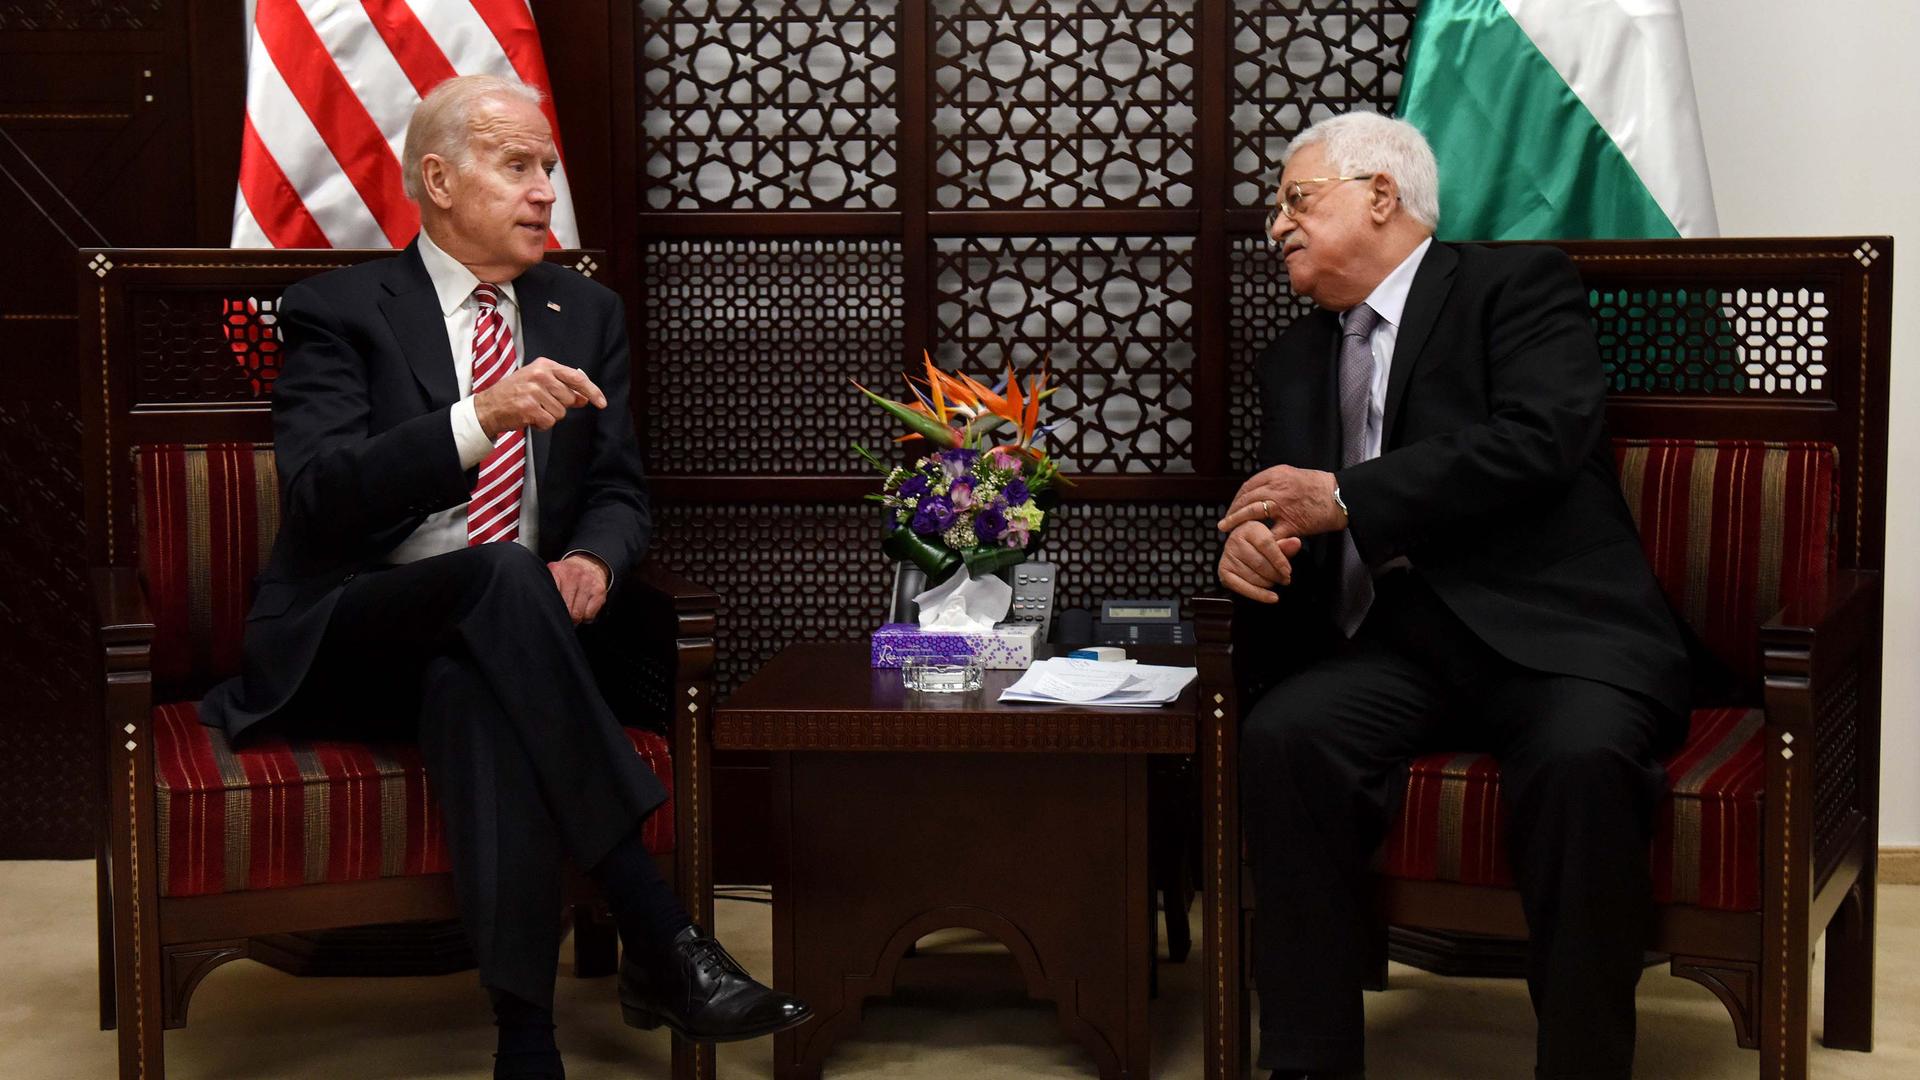 US President-elect Joe Biden, left, who was then US Vice President, and Palestinian President Mahmoud Abbas, meet at the presidential compound in Ramallah, West Bank, March 9, 2016.